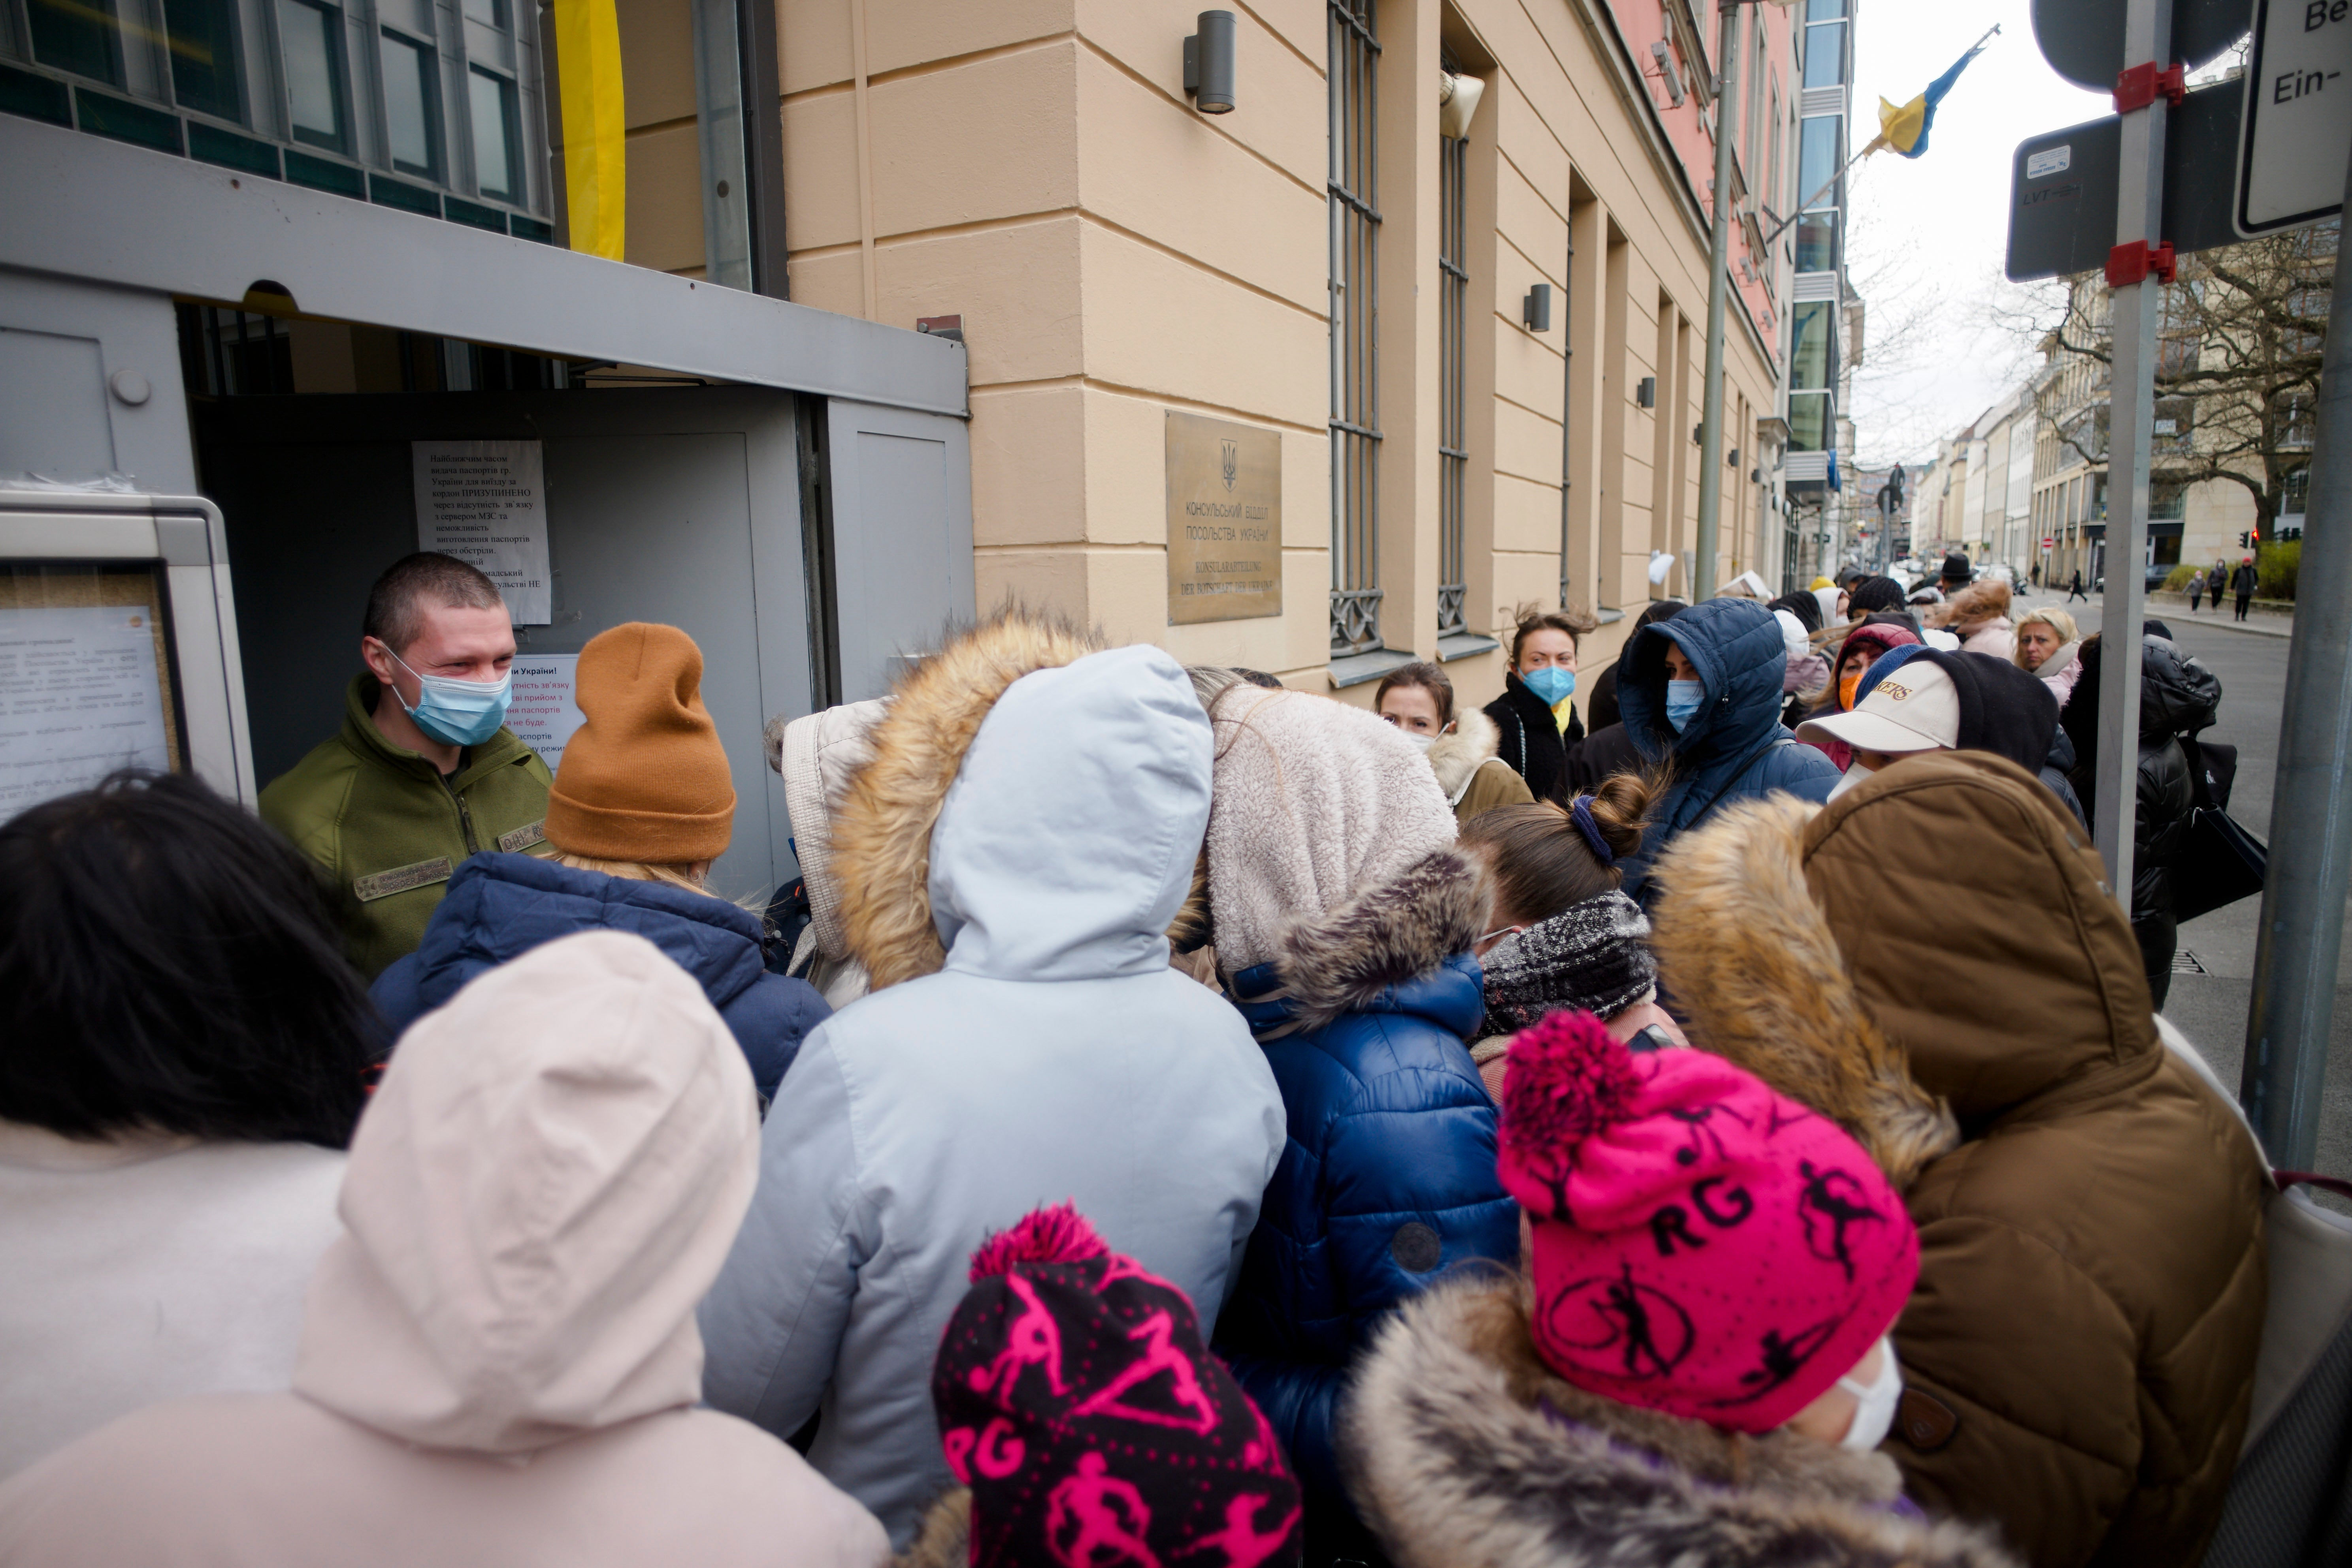 Ukrainian refugees wait in front of the consular department of the Ukrainian embassy in Berlin, Germany, in April 2022